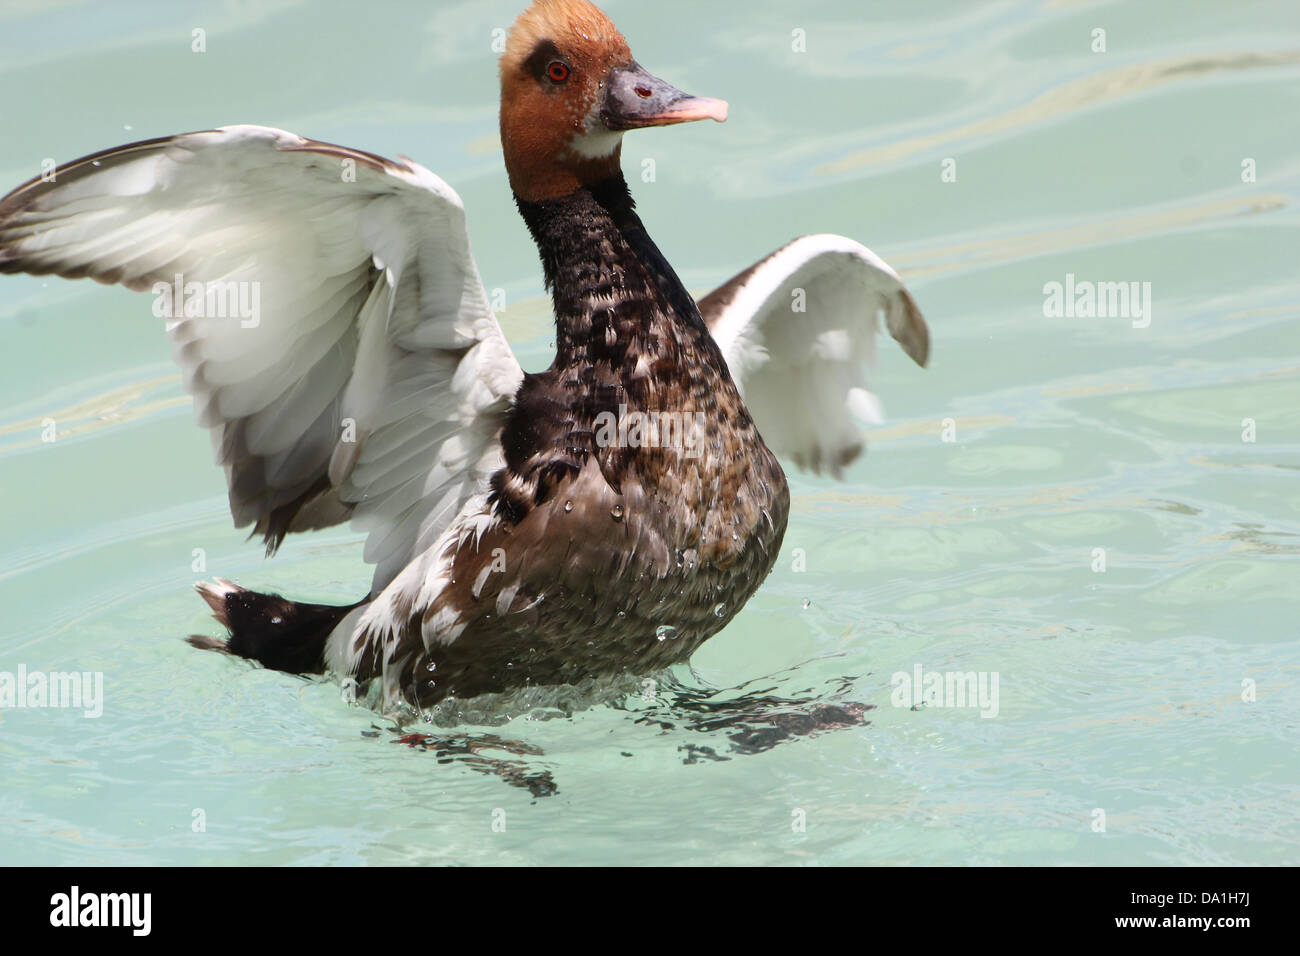 Detailed capture of Male Red-crested Pochard (Netta rufina) touching down & landing in a lake, wings opened - 5 images in series Stock Photo